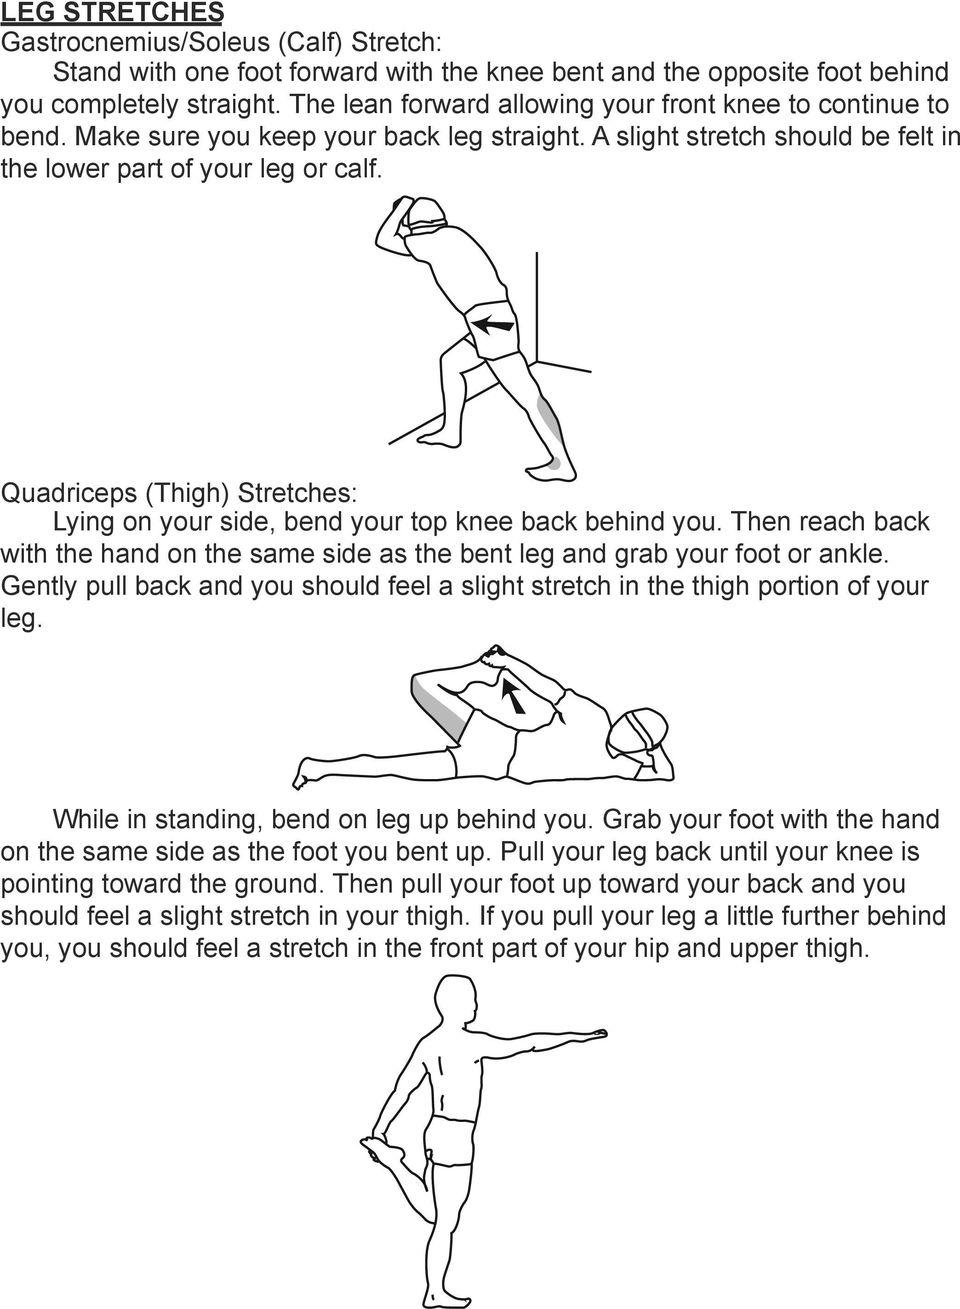 Quadriceps (Thigh) Stretches: Lying on your side, bend your top knee back behind you. Then reach back with the hand on the same side as the bent leg and grab your foot or ankle.